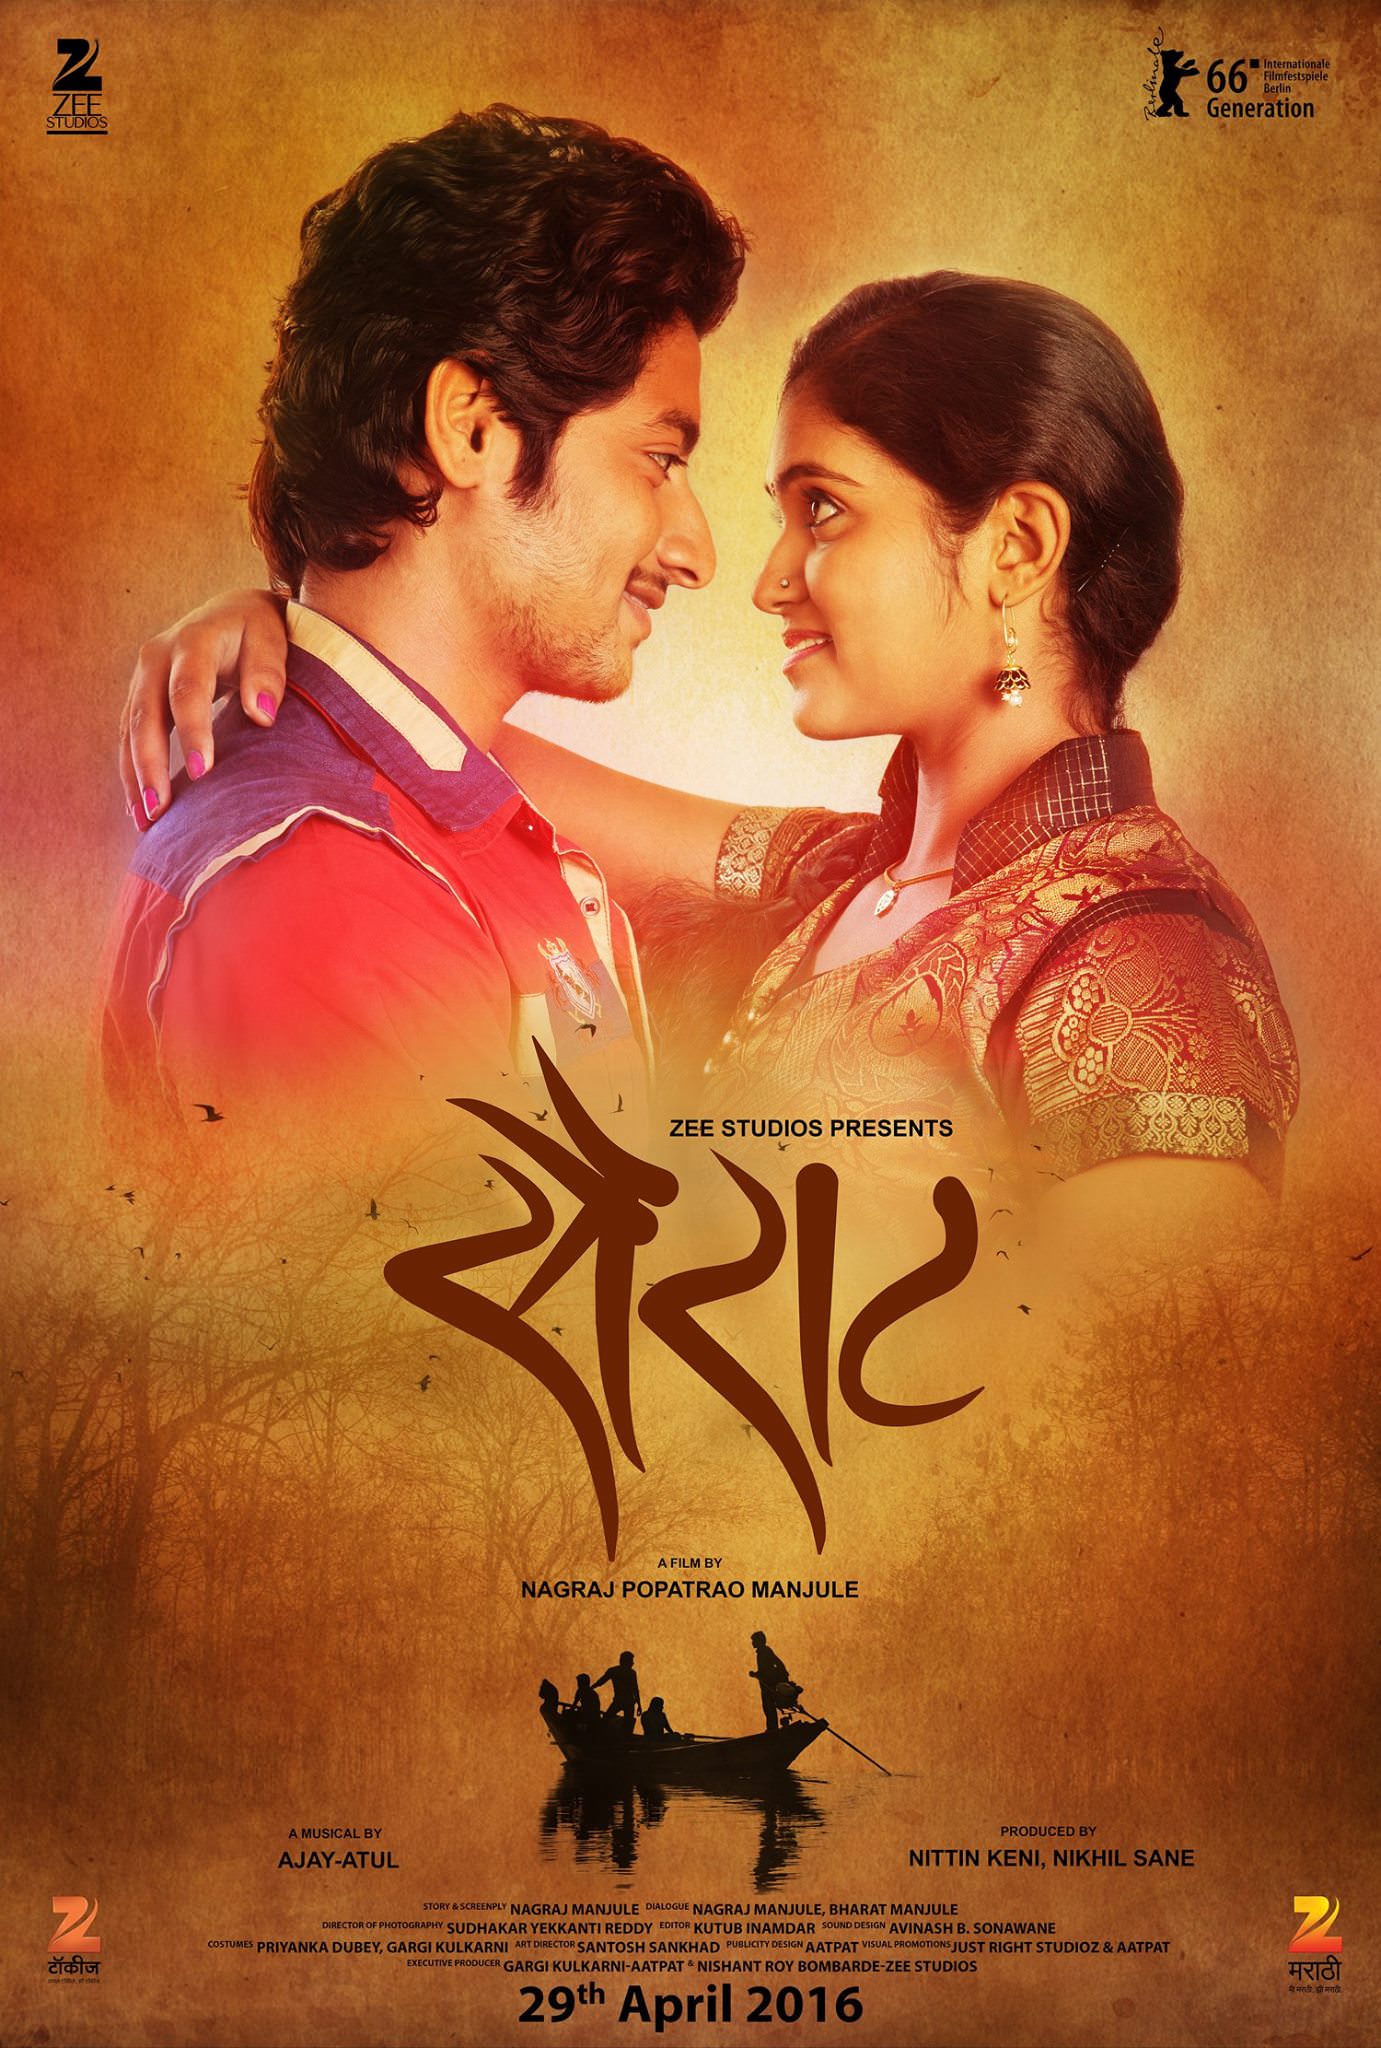 Why You Should Must Watch Sairat Movie?